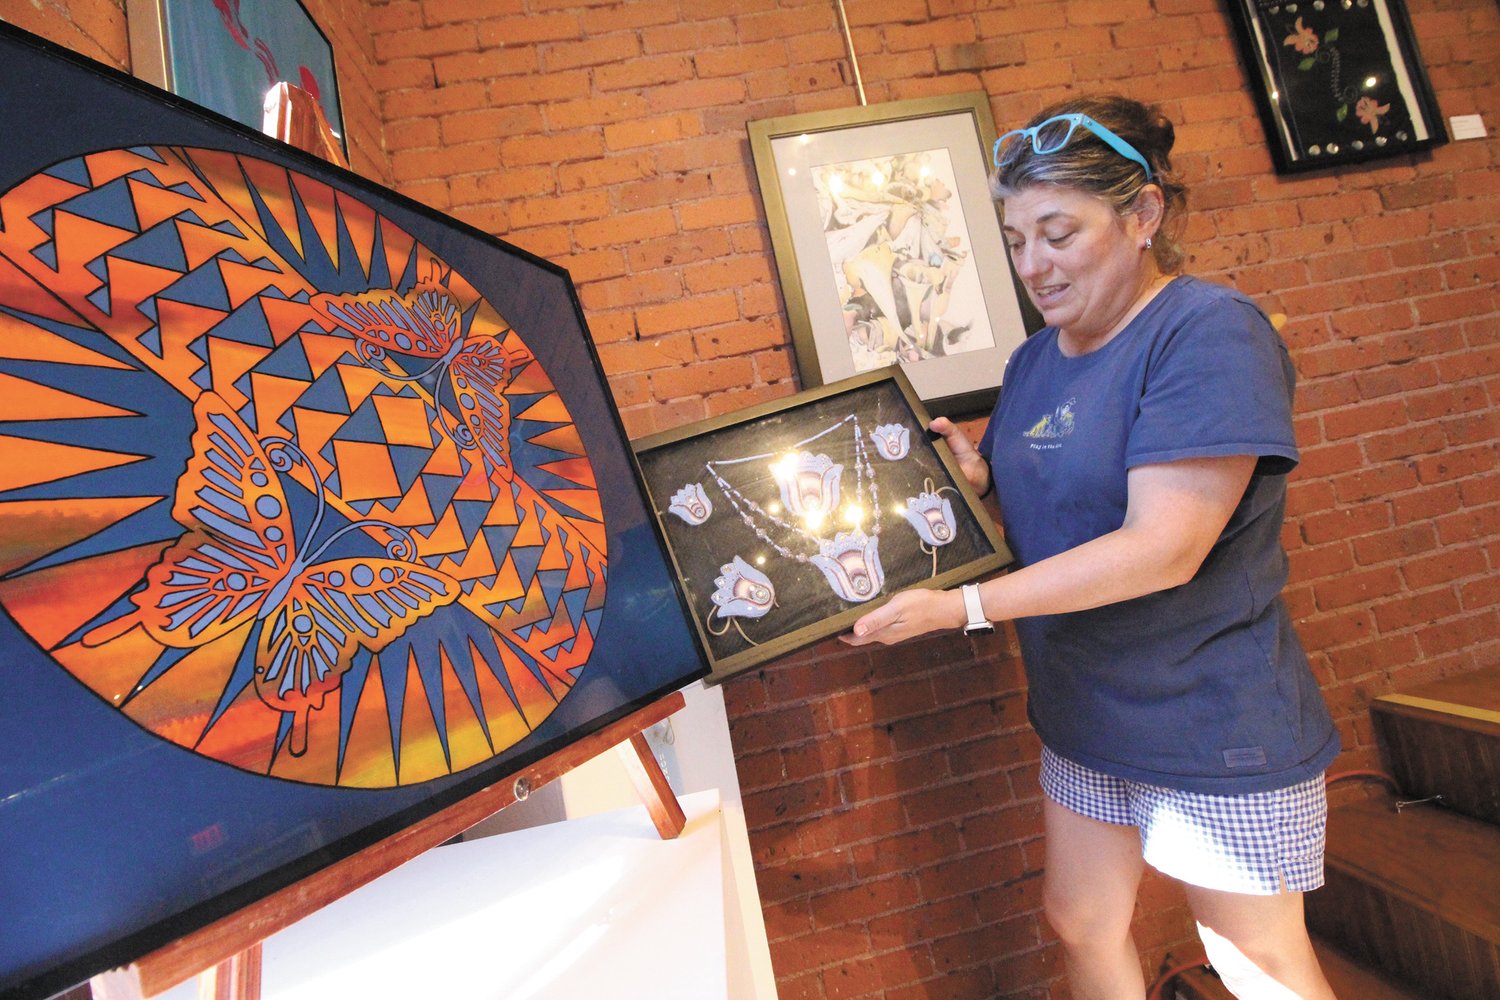 HER FAVORITE: Danielle Salisbury, executive director,  holds a work by Hebe-Tee-Tse-Lee in the Side by Side show bringing together a diverse group of artists now on display at the Warwick Center for the Arts through Aug. 20.